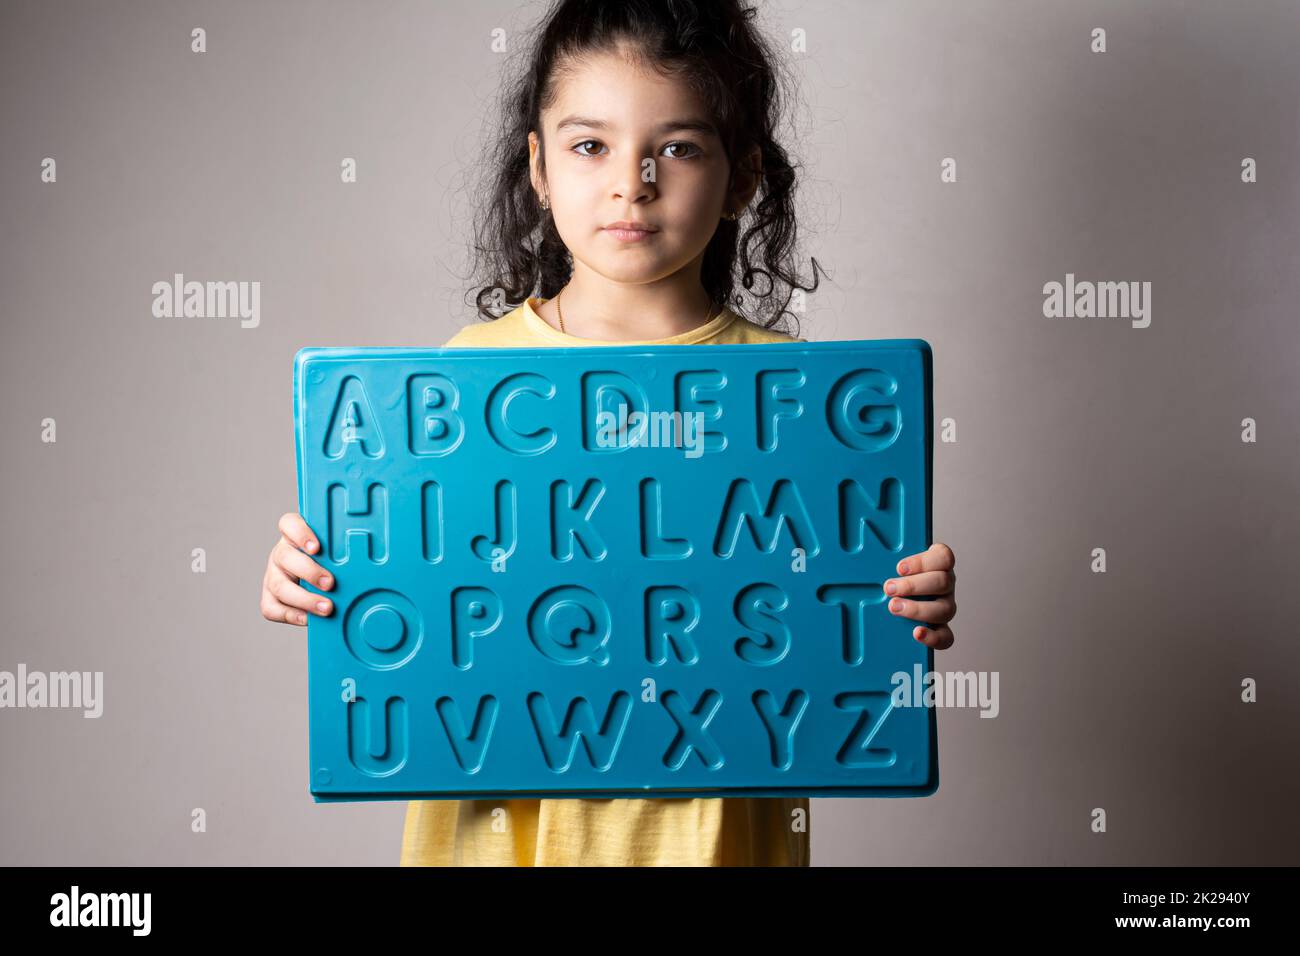 Little girl with yellow dress holding an English letters sheet in hands Stock Photo